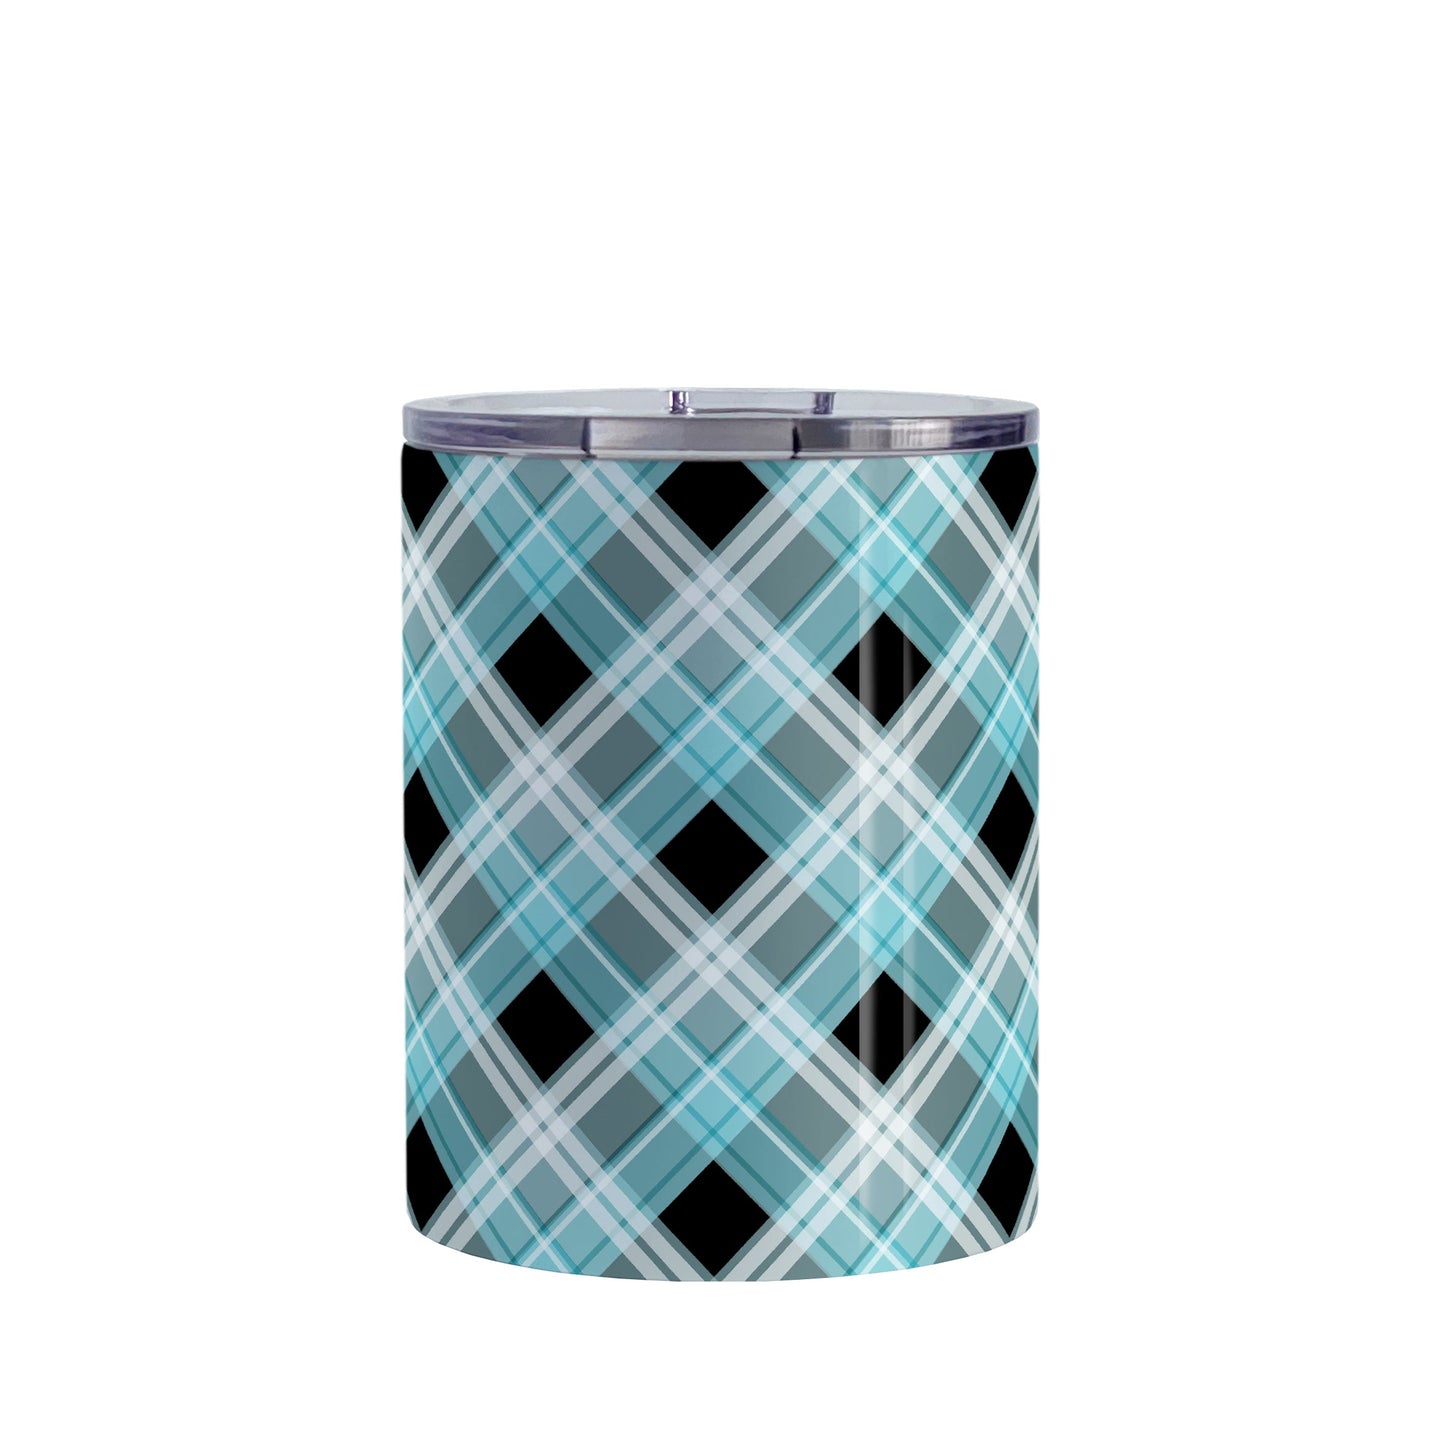 Alternative Black and Turquoise Plaid Tumbler Cup (10oz) at Amy's Coffee Mugs. A stainless steel insulated tumbler cup designed with a diagonal turquoise, black, and white plaid pattern that wraps around the insulated tumbler cup. A heavy-duty tumbler designed for someone who loves plaid patterns and the colors turquoise and black.